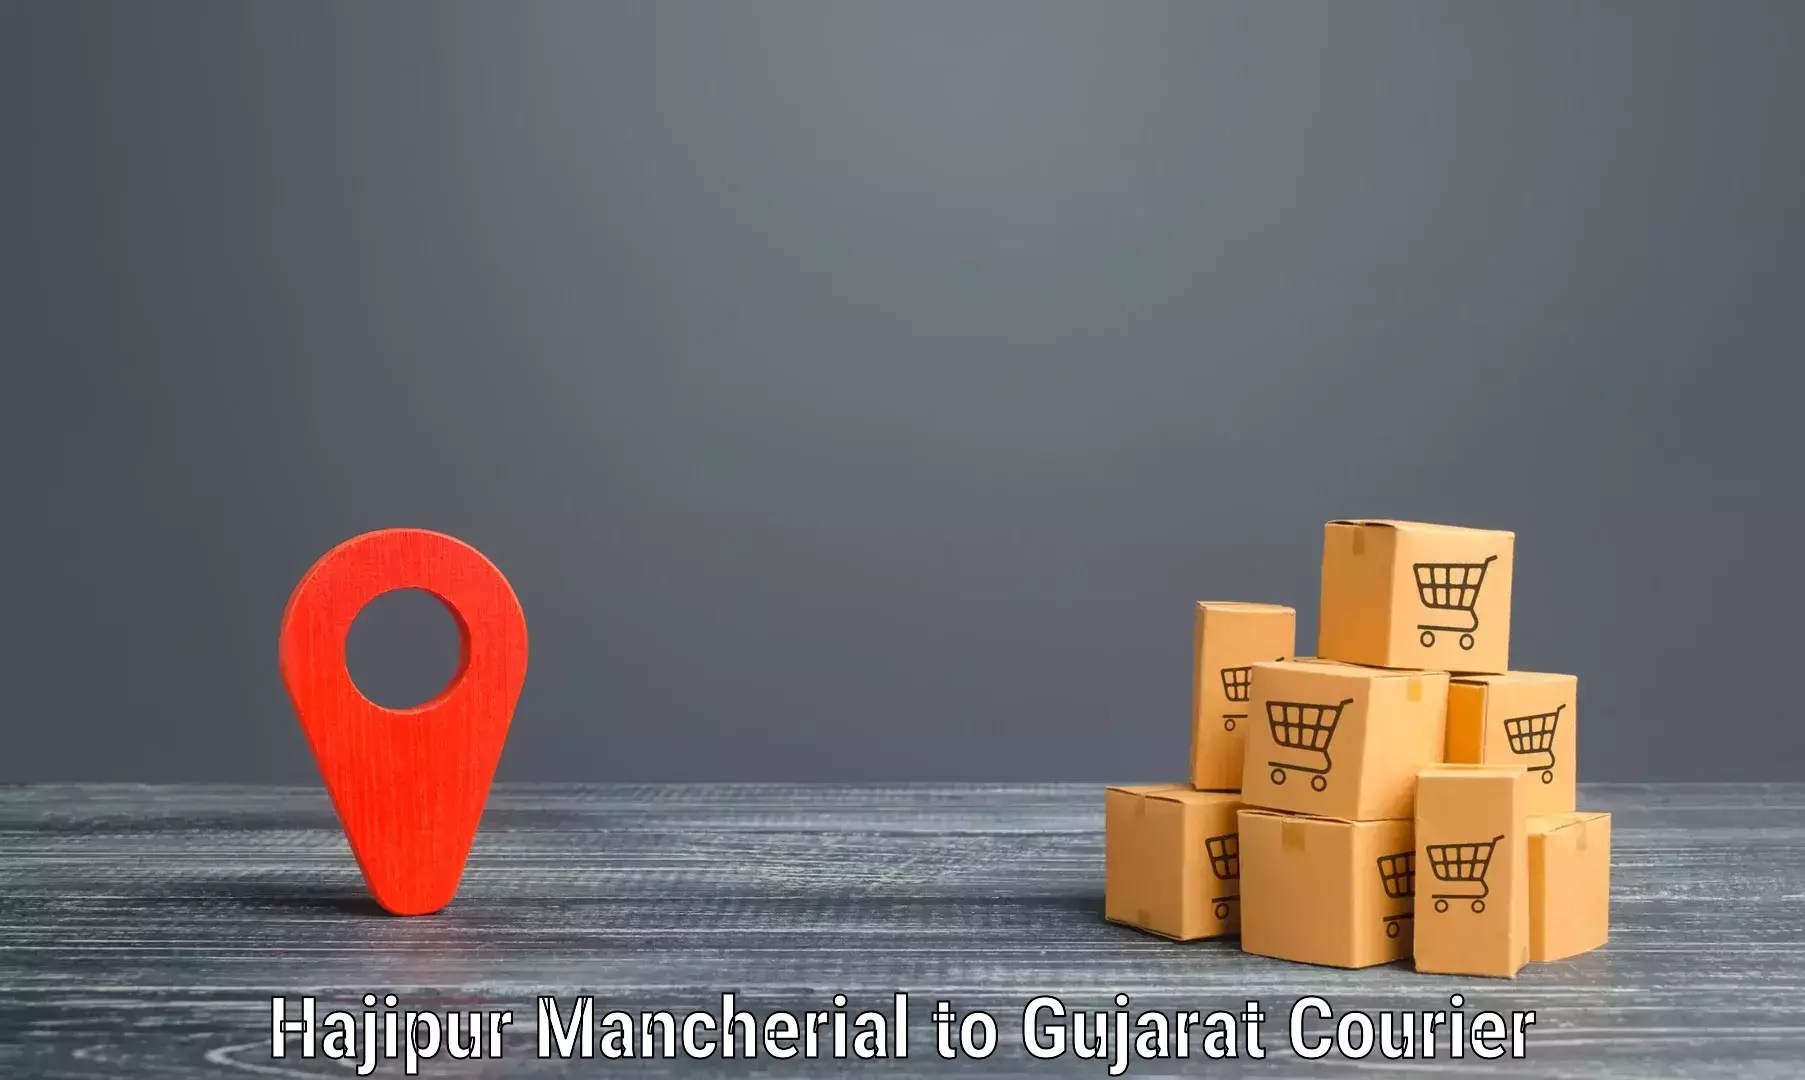 Courier service partnerships Hajipur Mancherial to Dhasa